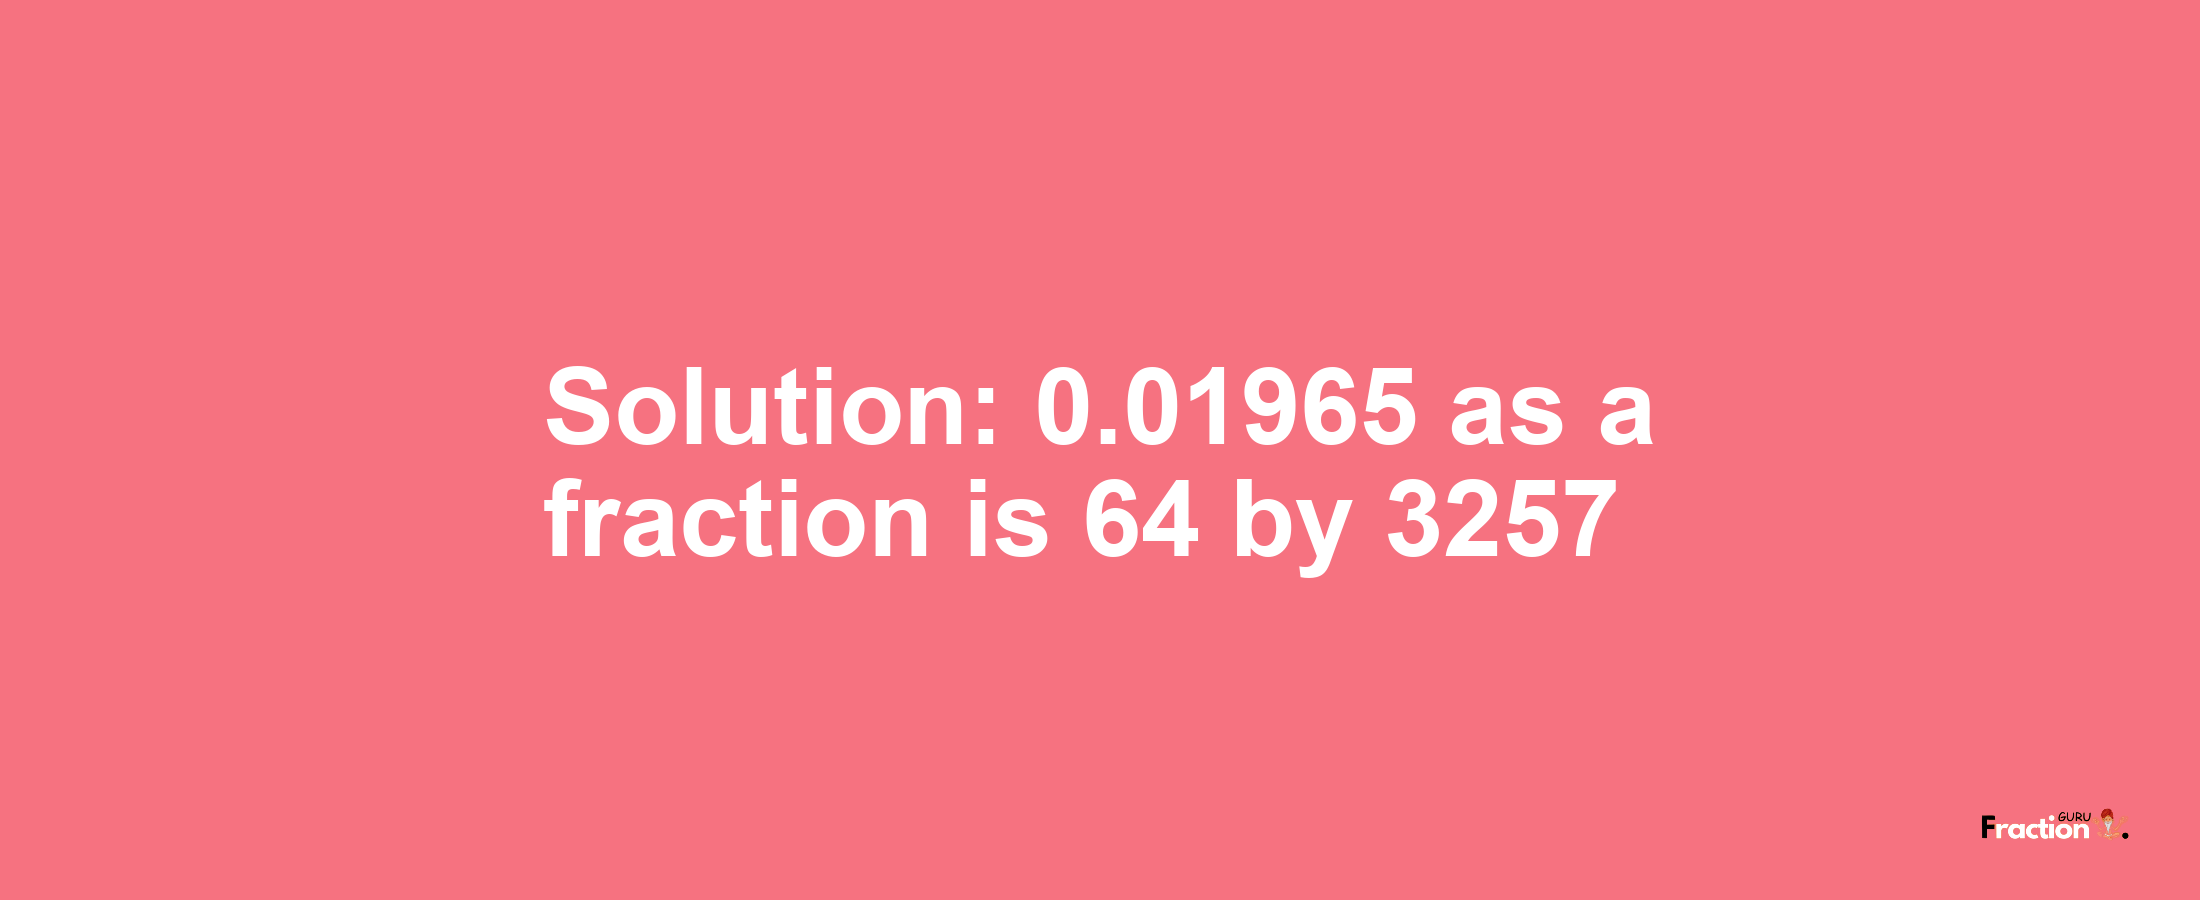 Solution:0.01965 as a fraction is 64/3257